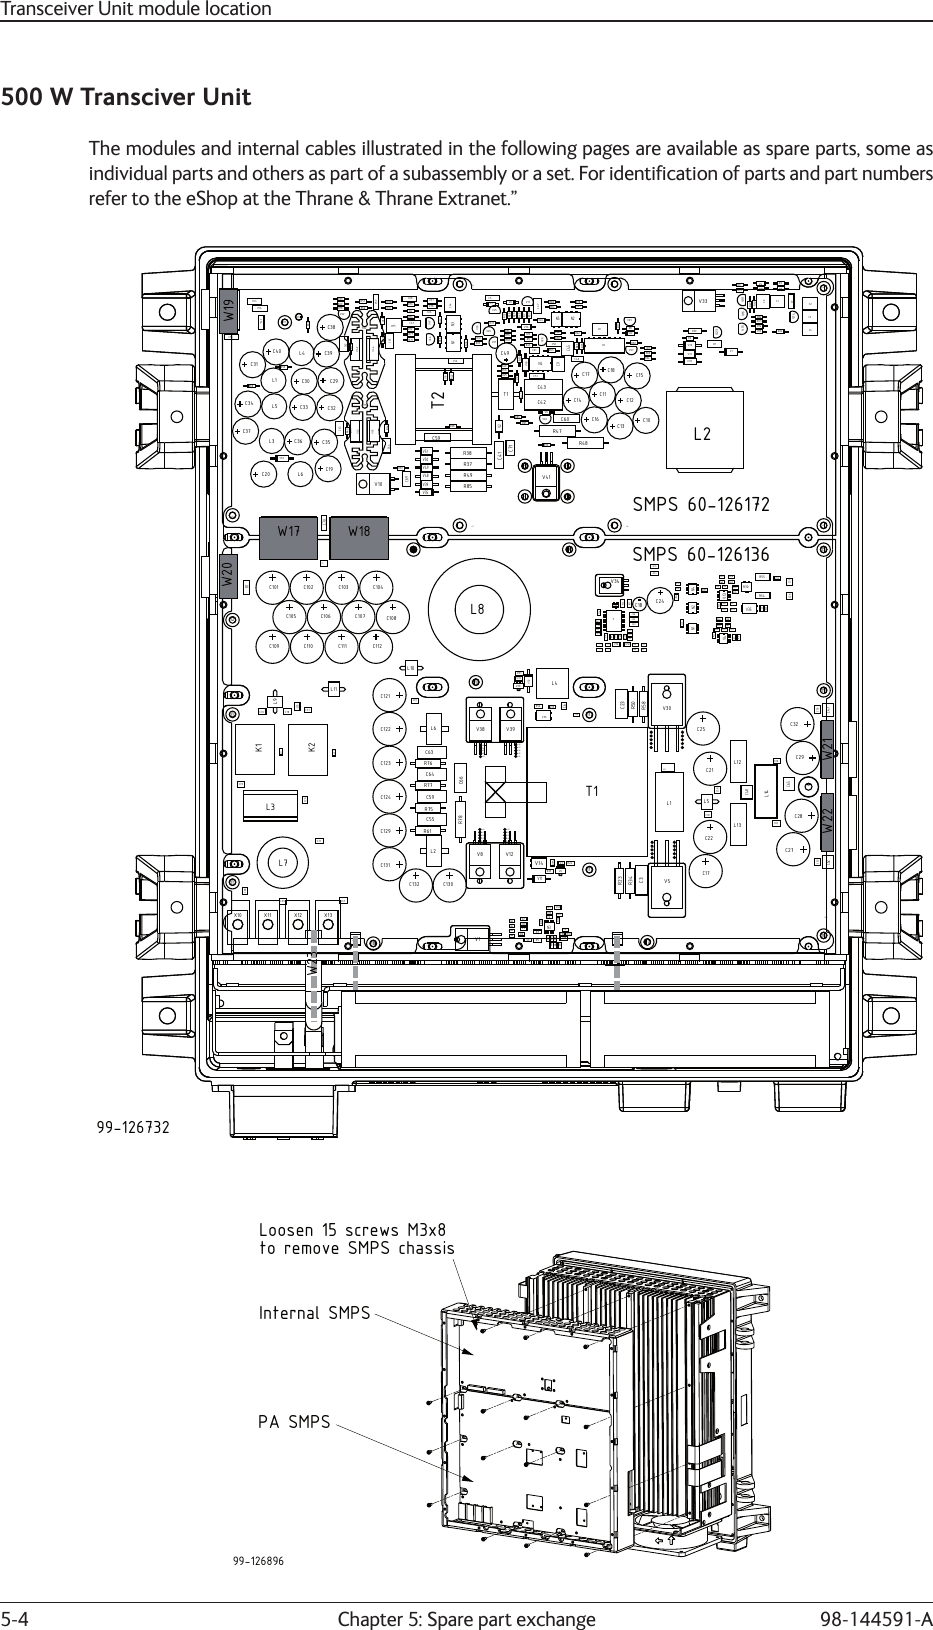 Chapter 5: Spare part exchange5-4 98-144591-A500 W Transciver UnitThe modules and internal cables illustrated in the following pages are available as spare parts, some as individual parts and others as part of a subassembly or a set. For identiﬁ cation of parts and part numbers refer to the eShop at the Thrane &amp; Thrane Extranet.”C20R49R85L6R38C52C59R58R22C29C63R43R52V2T1R53C9V9T2V39V35V48V49V50V51C41V7C51N4R37L3C37L1R60C33C30C35C36R44C64V45V43C32C31C34L5HS1C12C15C10V30V31R42R59R24R80R11C18C61R46R83V27C17C42C16C11C13V18R12R6C67R75R77R19R56R18R73R69 V38C38V22R74R72N3R71C68R76R4C8V26R31R28R68R30R23V29R17V36V17R15R29C5V25R55V5V24R9V12R8R34R45R62N2R70C47C65V42V44R41R39V11C57R57 R78 V37V46R36N1C44R67C66V47R66HS2C62C46R40V40C14C43C49R81V6R32R33R7V21C45R16R26V28R64R54N5C58V32R20D1V1V16 V19R50R65L4C39C40R14H6H12H11H7H10H9V34R51V52C70R27V15V14C6C7R84R63R13C1V23R1V33C2C3C4R10R82C55V41H1X6X7H2 H3H4H5X1C53C56C60R86R61R47R25V20C71R35R48L2R5R21V4R79R3R2C69R87C19V10C54V8H8V6L9C69H7C109C110C111C112C101C102 C103 C104C105 C106 C107 C108C76 C78C75C129C131C130V18R1L11OLSC4R14R7R17R8N3R13V10C2R18R12V17C8R16R84R85R86R6R10R9L10R80R65R44C12R36R41R39R37R69V24C20C11R43C15R79R82C19C14C18C38C37R57R53R56C39N5V16R24R61C63C132C121T1V7C3V36C25R58R50C23R23R34C48C60C65C74R2L8L14V5V30V1C24C26C31K1V21V22K2L1R33L5C30V15R25V14L2C124C9C54V4R11R22R15R4C1N4R71N2V20N1R46C7R48R30C44V13R35 R29R26R67R32R27R55V25R73C16C29C28C27C57C62C32C47C56V37R54X10X6X7X5X4X3X23X22H13H4H10H9H6H5H3H11H12H2H1H8X13X12X11V34L7C122C123L6R76C64R77C59R75C55C13C67R62R63R74R28R66R68R21V35C5R40R49R81R42R31R70V33R52C72C68C71C6L4R78C66C61V11C77V3V19V2C17R83V9R5R3R19C58V31V32V28R51L3C70H29H30H31H32H33V12V8V38 V39H20H21H22H23H19H15H16H17H18H14H24H25H26H27H28L13L12C21C22H34H36H37H41H38H39H49H44H50H51H52H53H45H46H47H48H40H42H43H3599-126732SMPS 60-126172SMPS 60-126136W17 W18W19W20W21W22W2399-126896Loosen 15 screws M3x8Internal SMPSto remove SMPS chassisPA SMPSTransceiver Unit module location